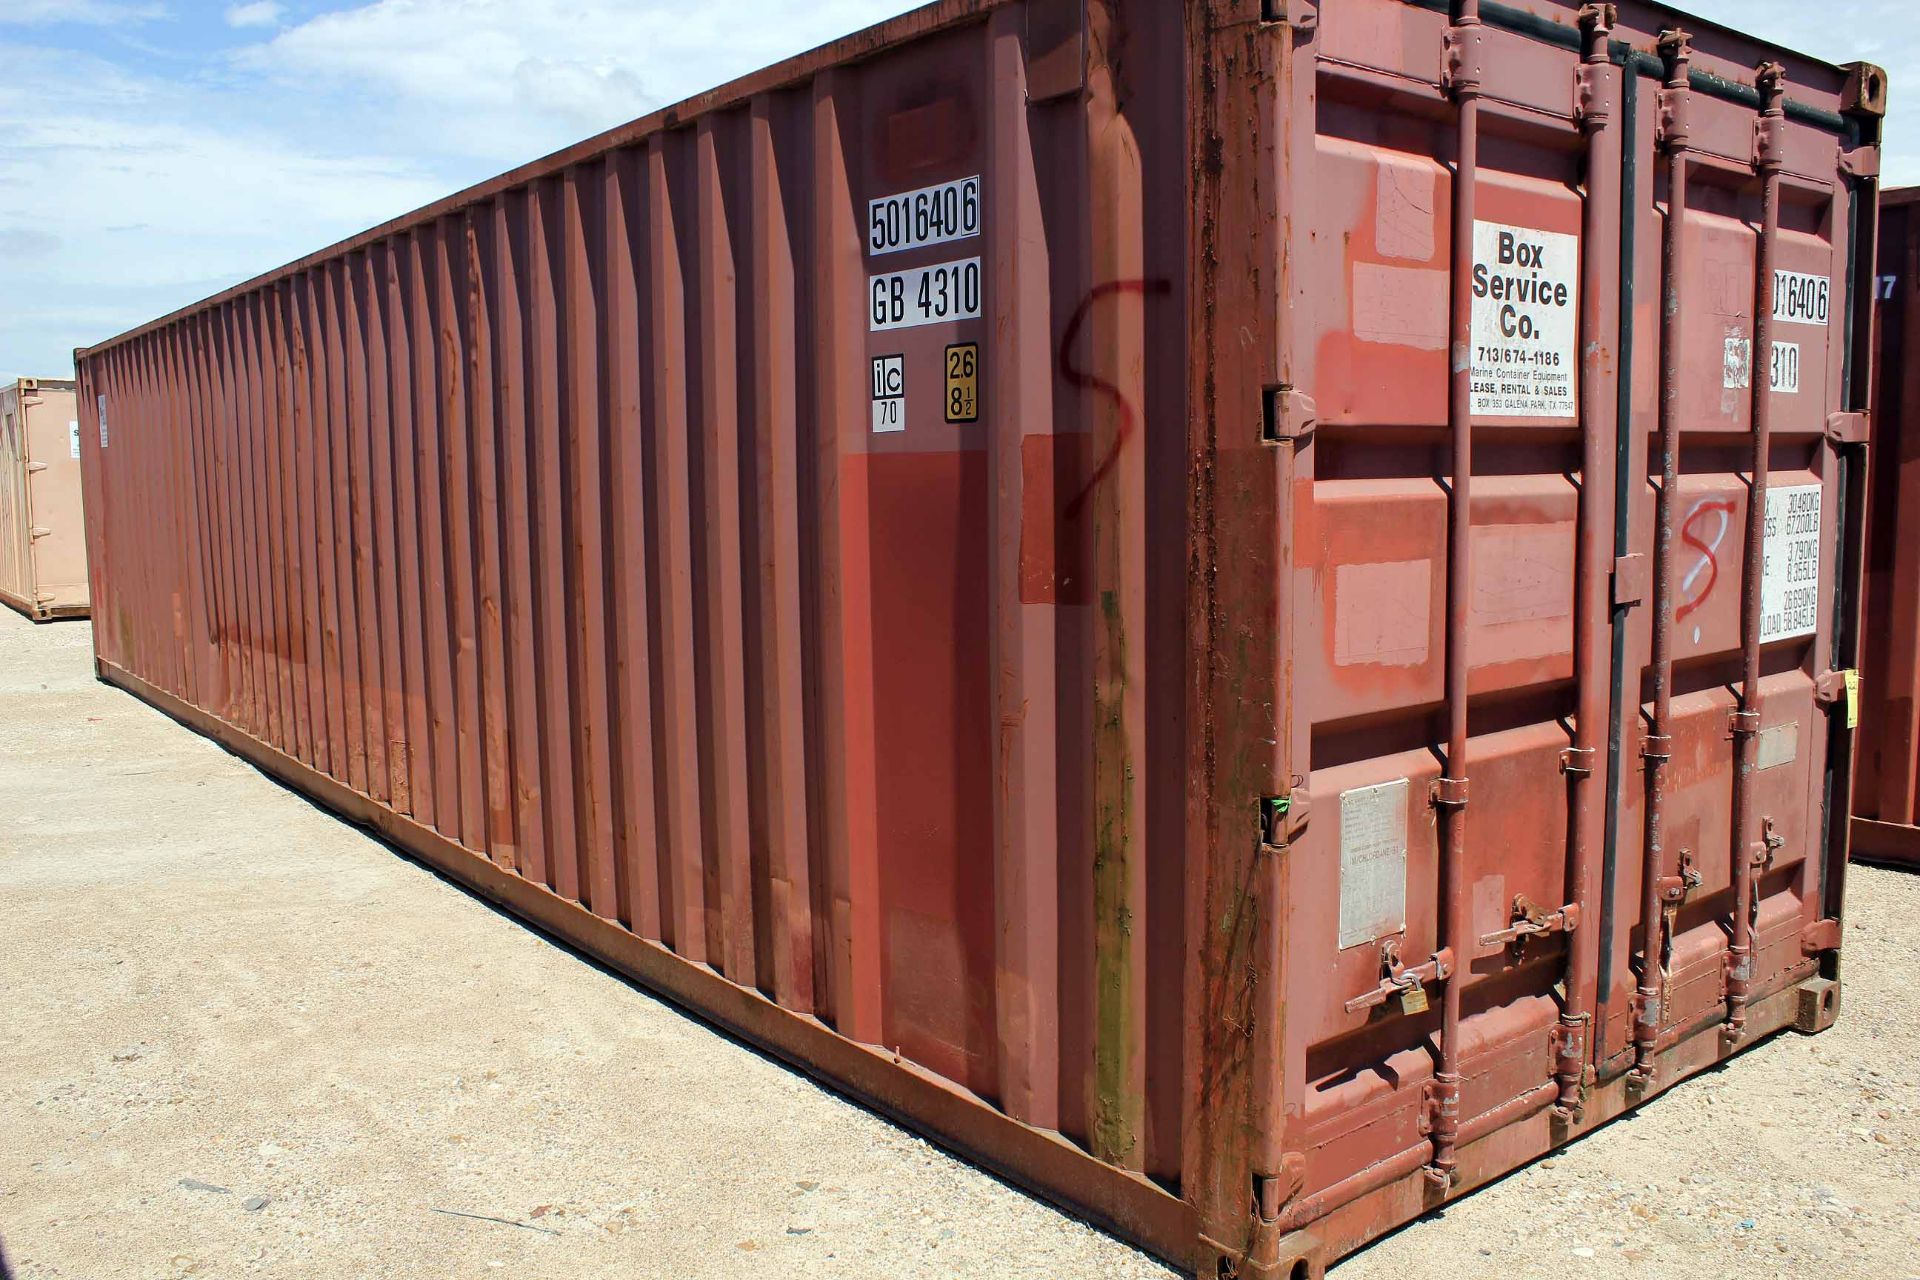 STEEL STORAGE CONTAINER, 40'L. x 96"W. x 8' ht., dbl. swing-out front doors (Unit 5016406-GB4310) - Image 2 of 3